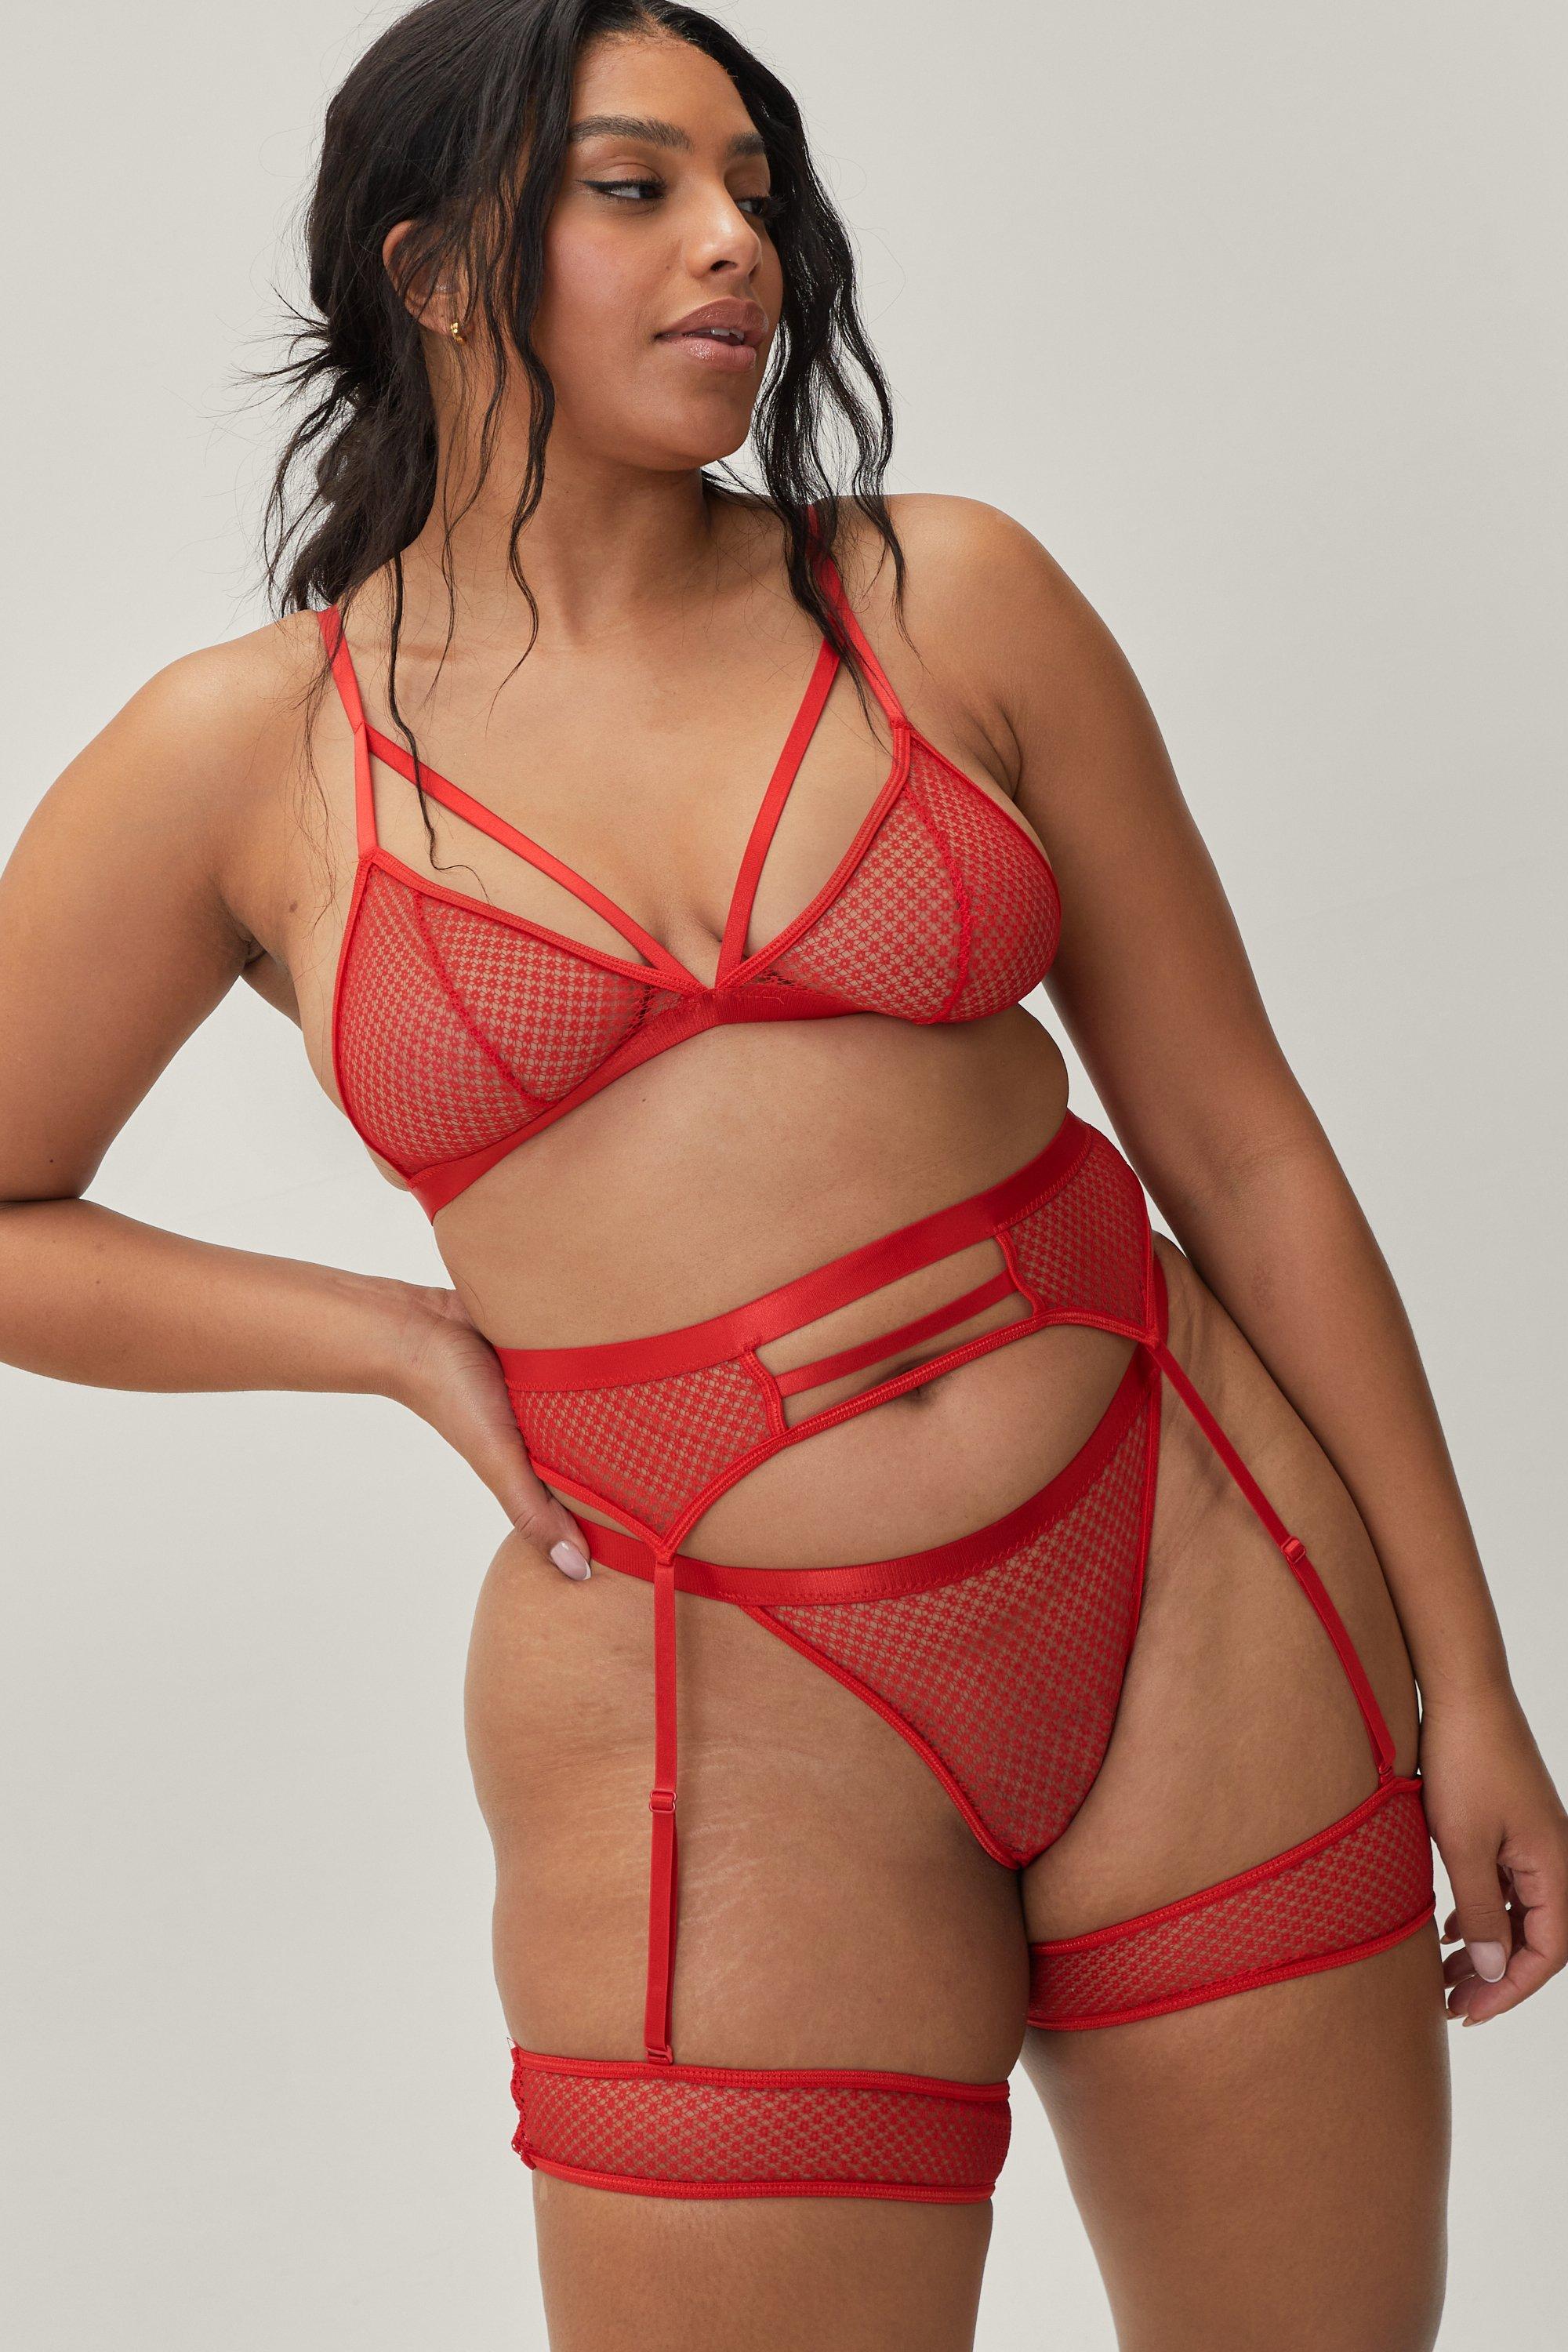 Nasty Gal Womens Plus Fishnet Lace Triangle Harness 3pc Set - Red - 16, Red